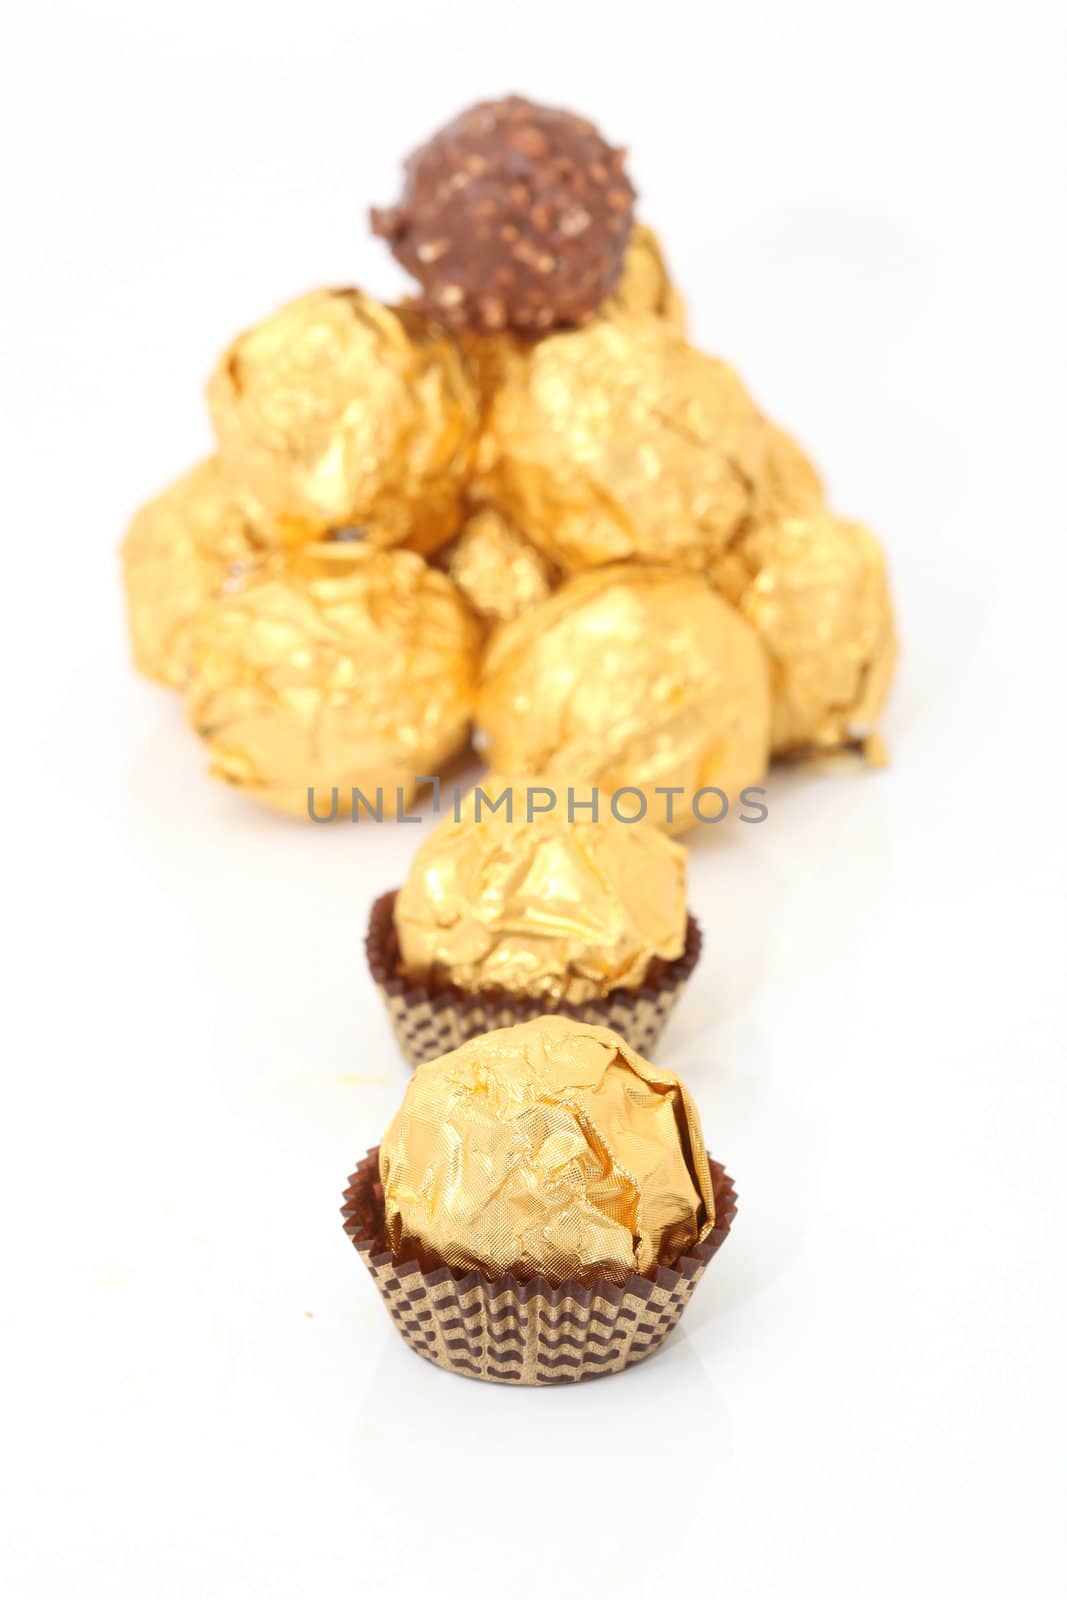 gold wraped chocolate sphere dessert isolated on white background